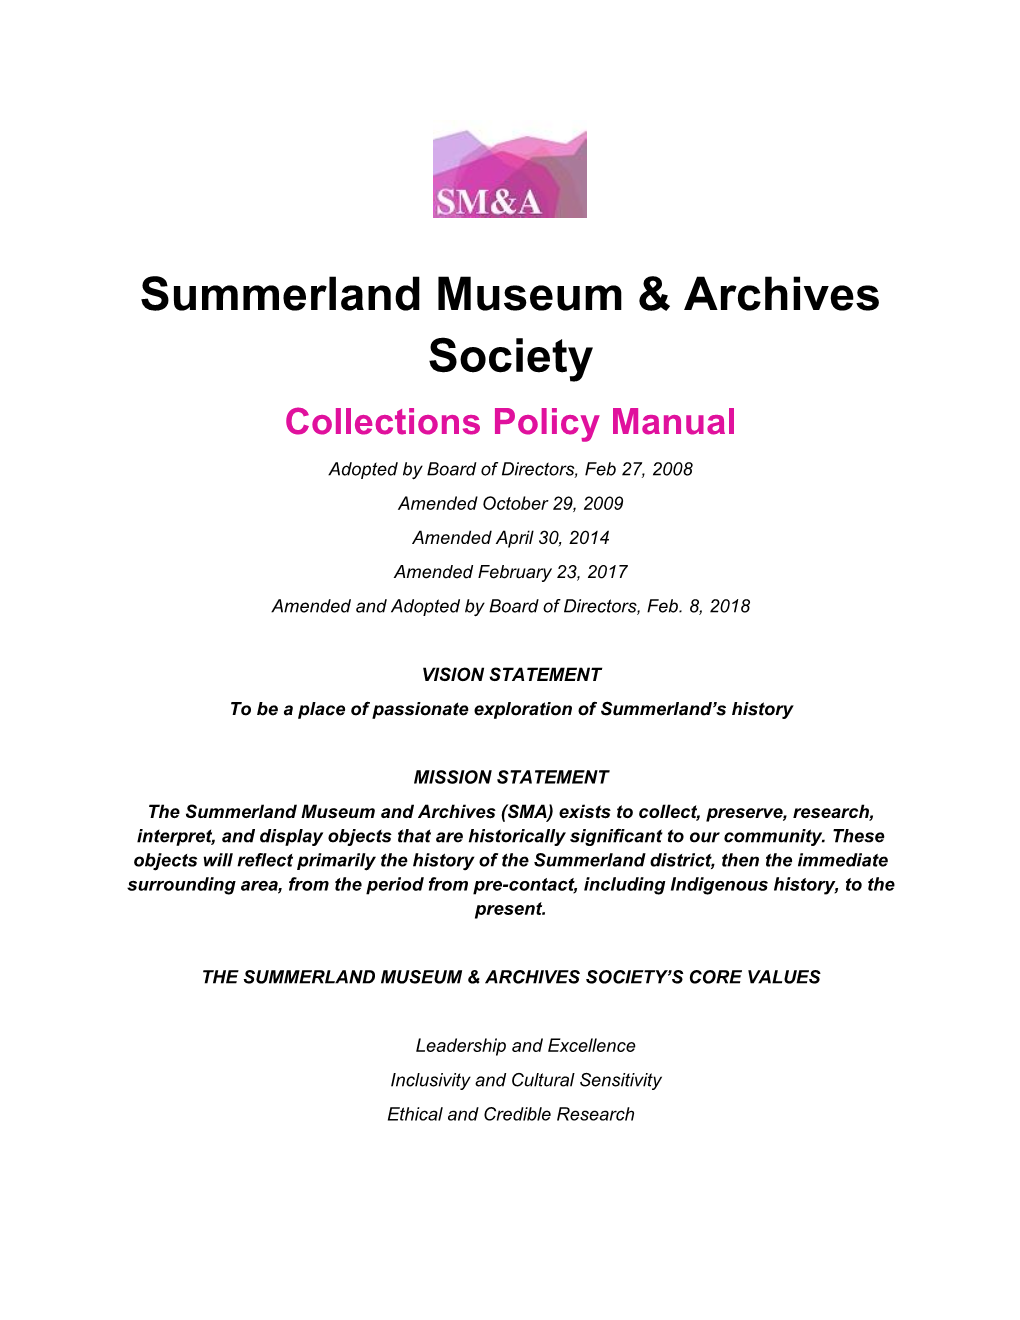 Summerland Museum & Archives Society